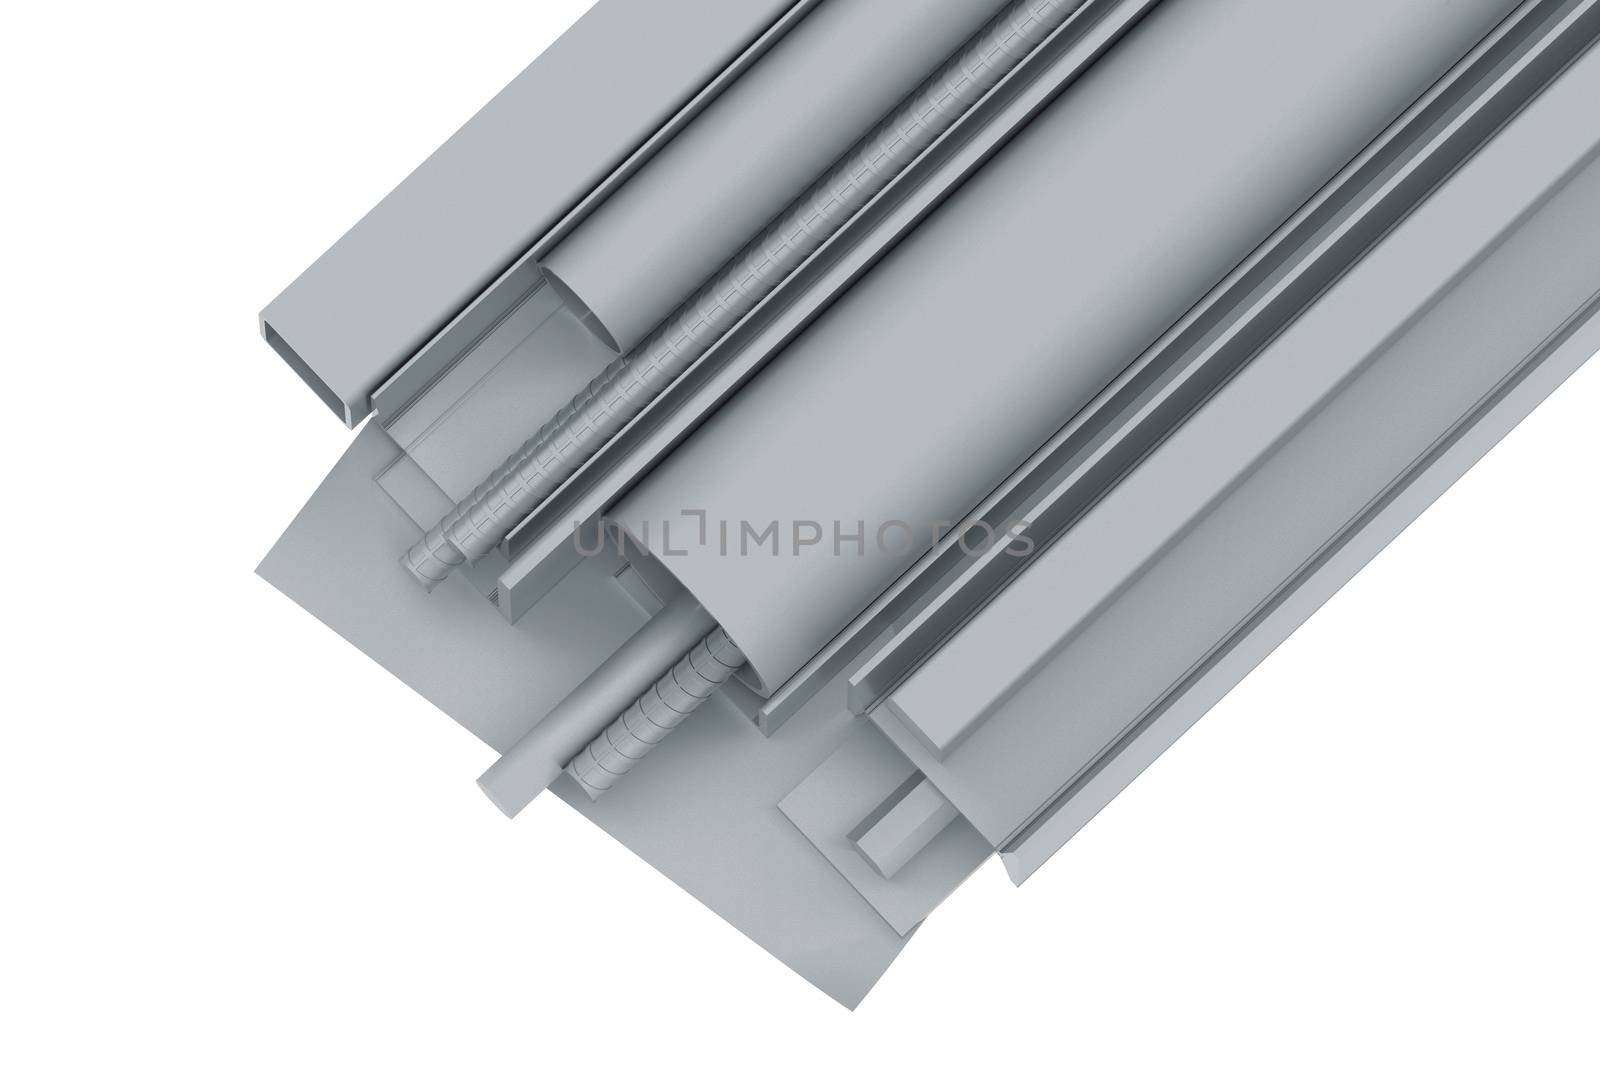 Metal pipes, angles, channels, fixtures and sheet by cherezoff